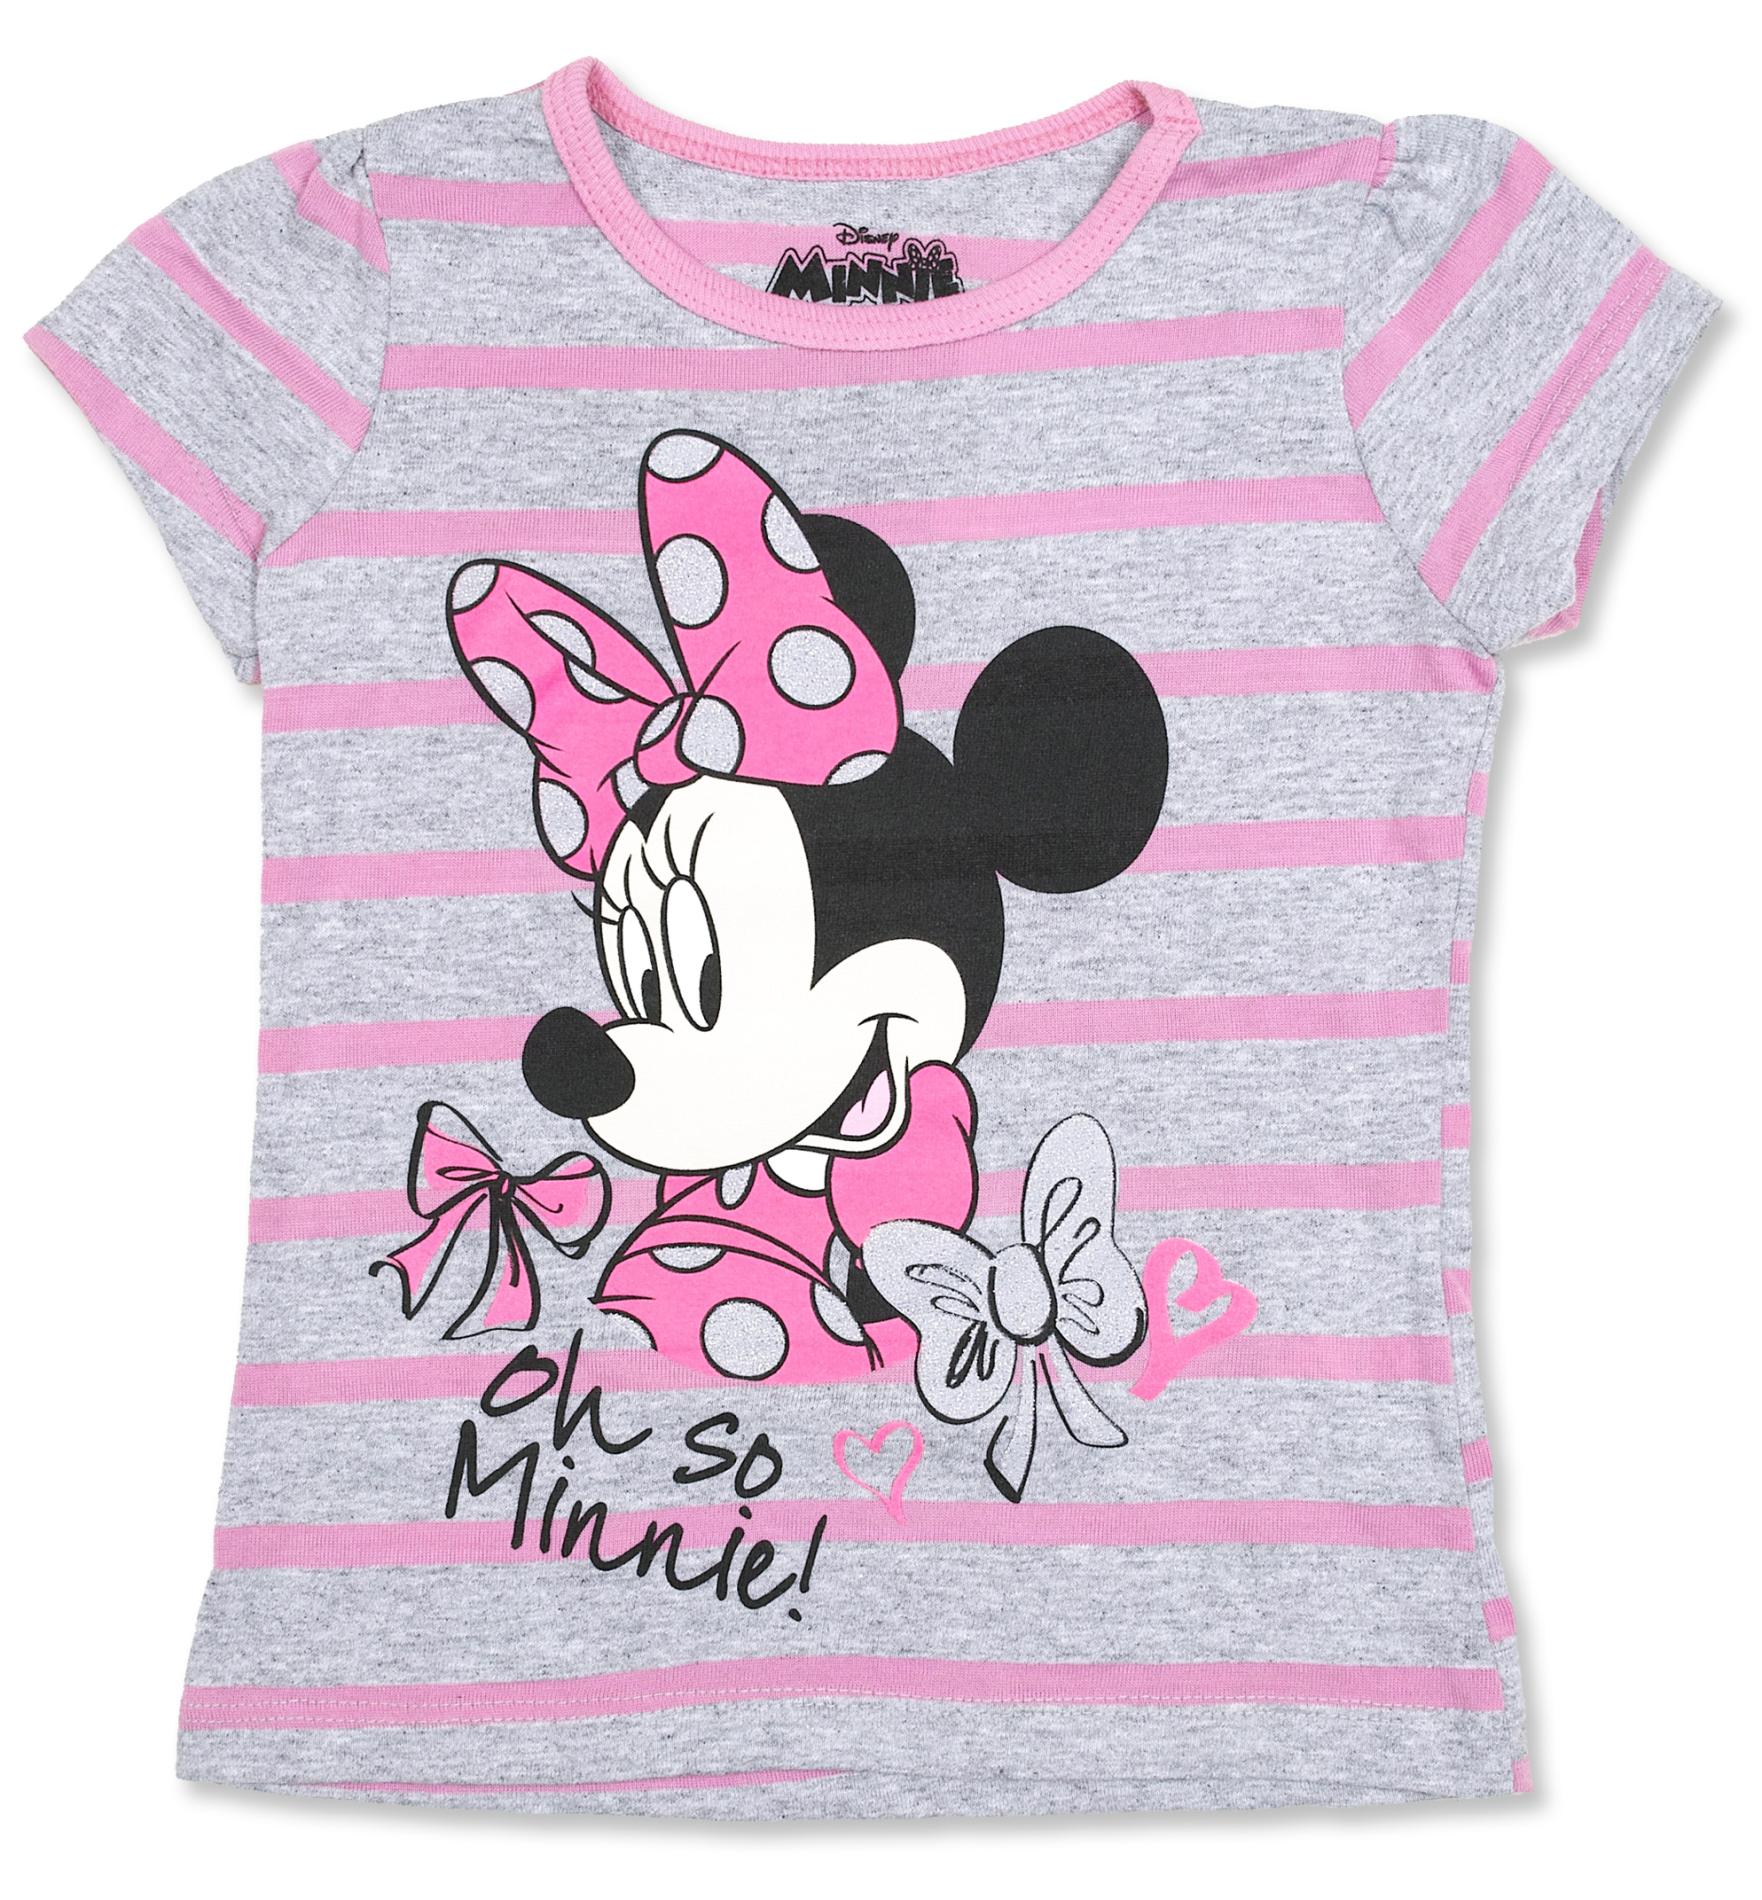 Disney Minnie Mouse Toddler Girl's T-Shirt - Striped